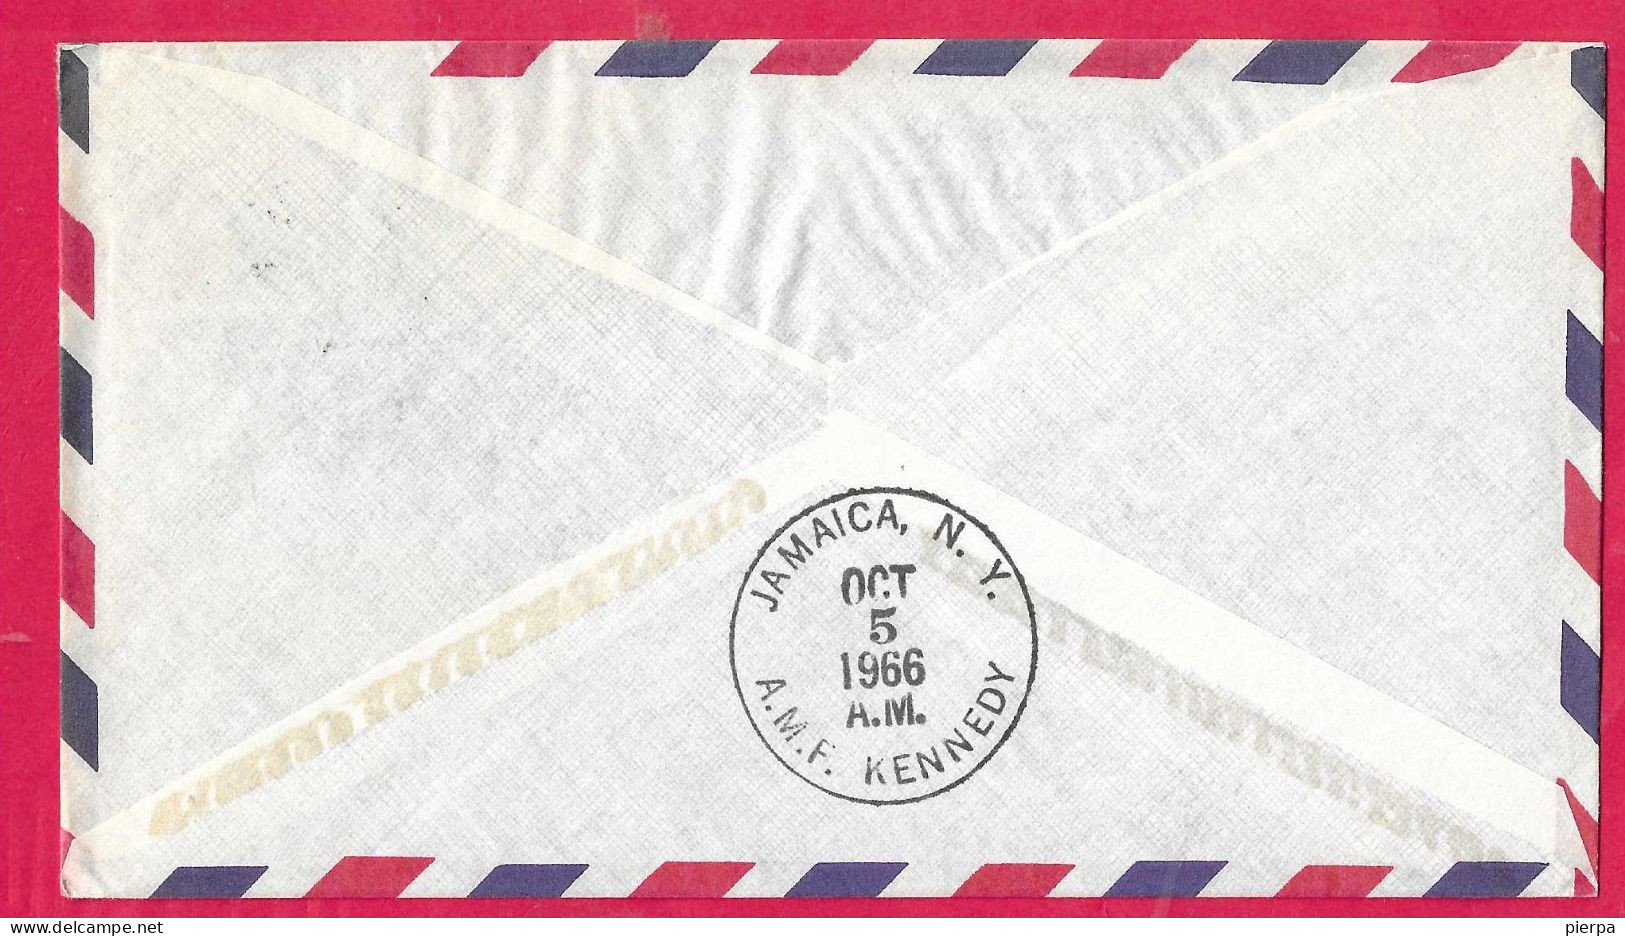 DANMARK - FIRST FLIGHT - SWA - FROM KOBENHAVN TO JAMAICA, N.Y. *5.10.66* ON OFFICIAL COVER - Airmail